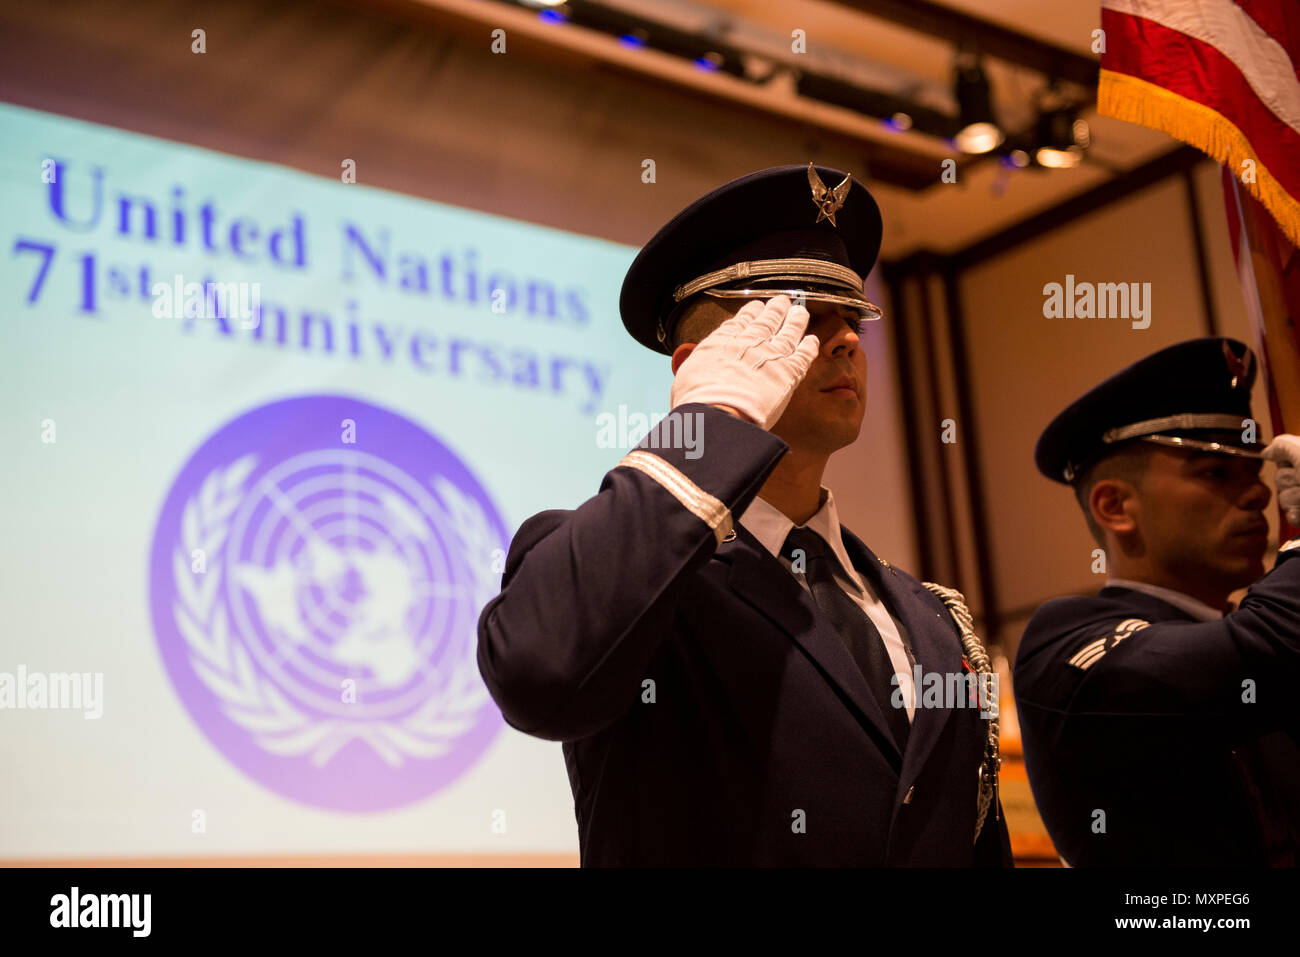 A Yokota Air Base Honor Guard member salutes during the presentation of the colors ceremony during the United Nations Day 71st Anniversary Celebration in Tokyo, Japan, Nov. 21, 2016. United Nations Day commemorates the anniversary of the United Nations Charter in 1945 and has been celebrated as U.N. Day since 1948. (U.S. Air Force photo by Airman 1st Class Donald Hudson/Released) Stock Photo